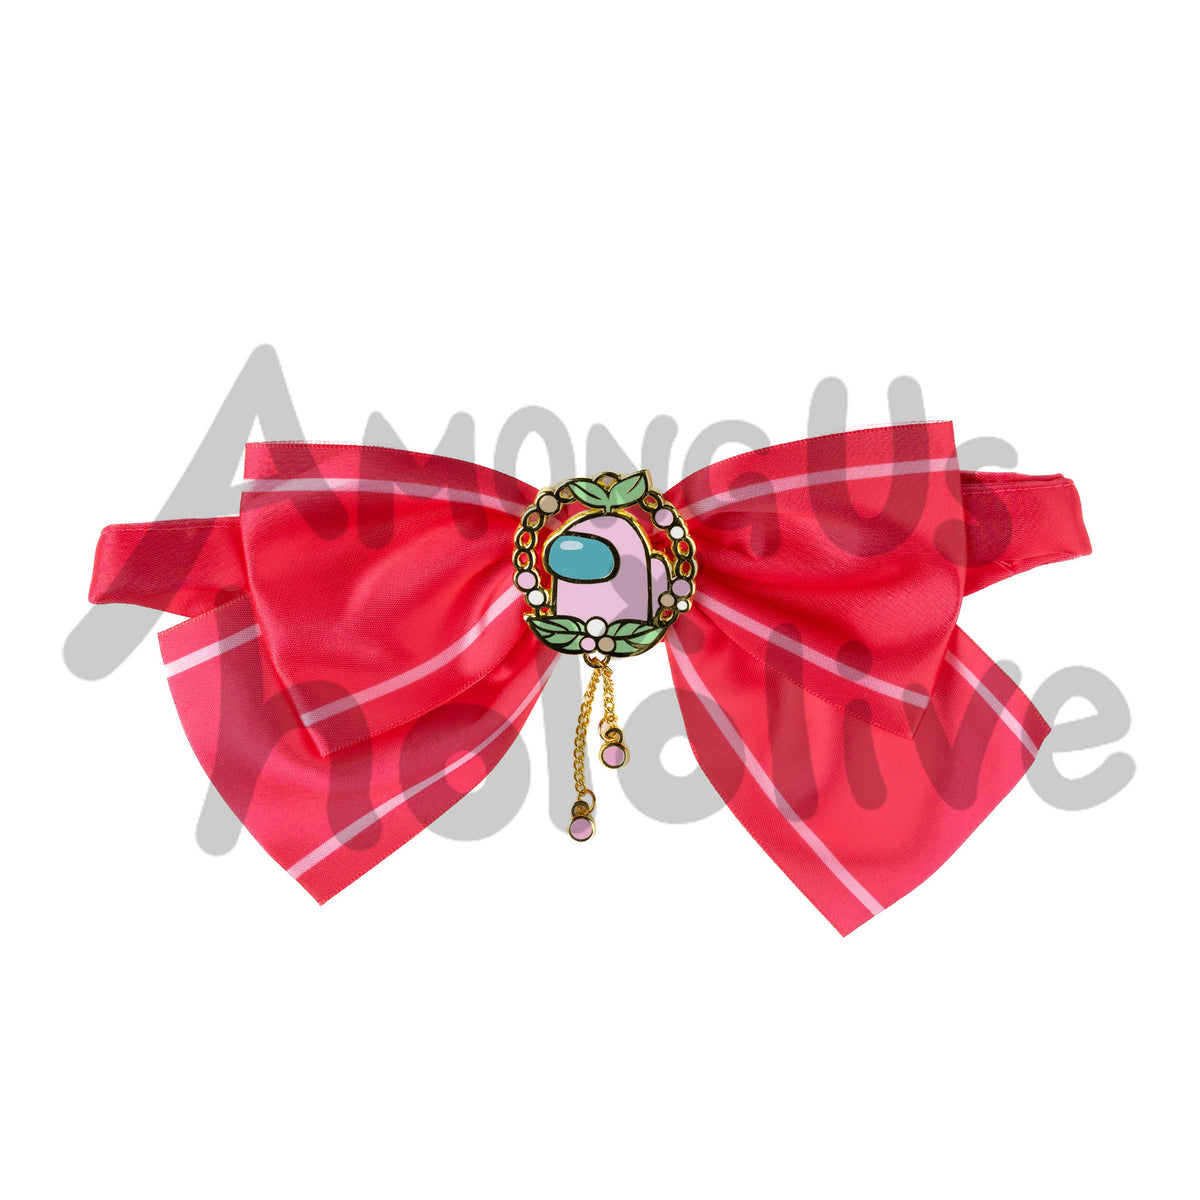 A product photo of the front of the whole bow.